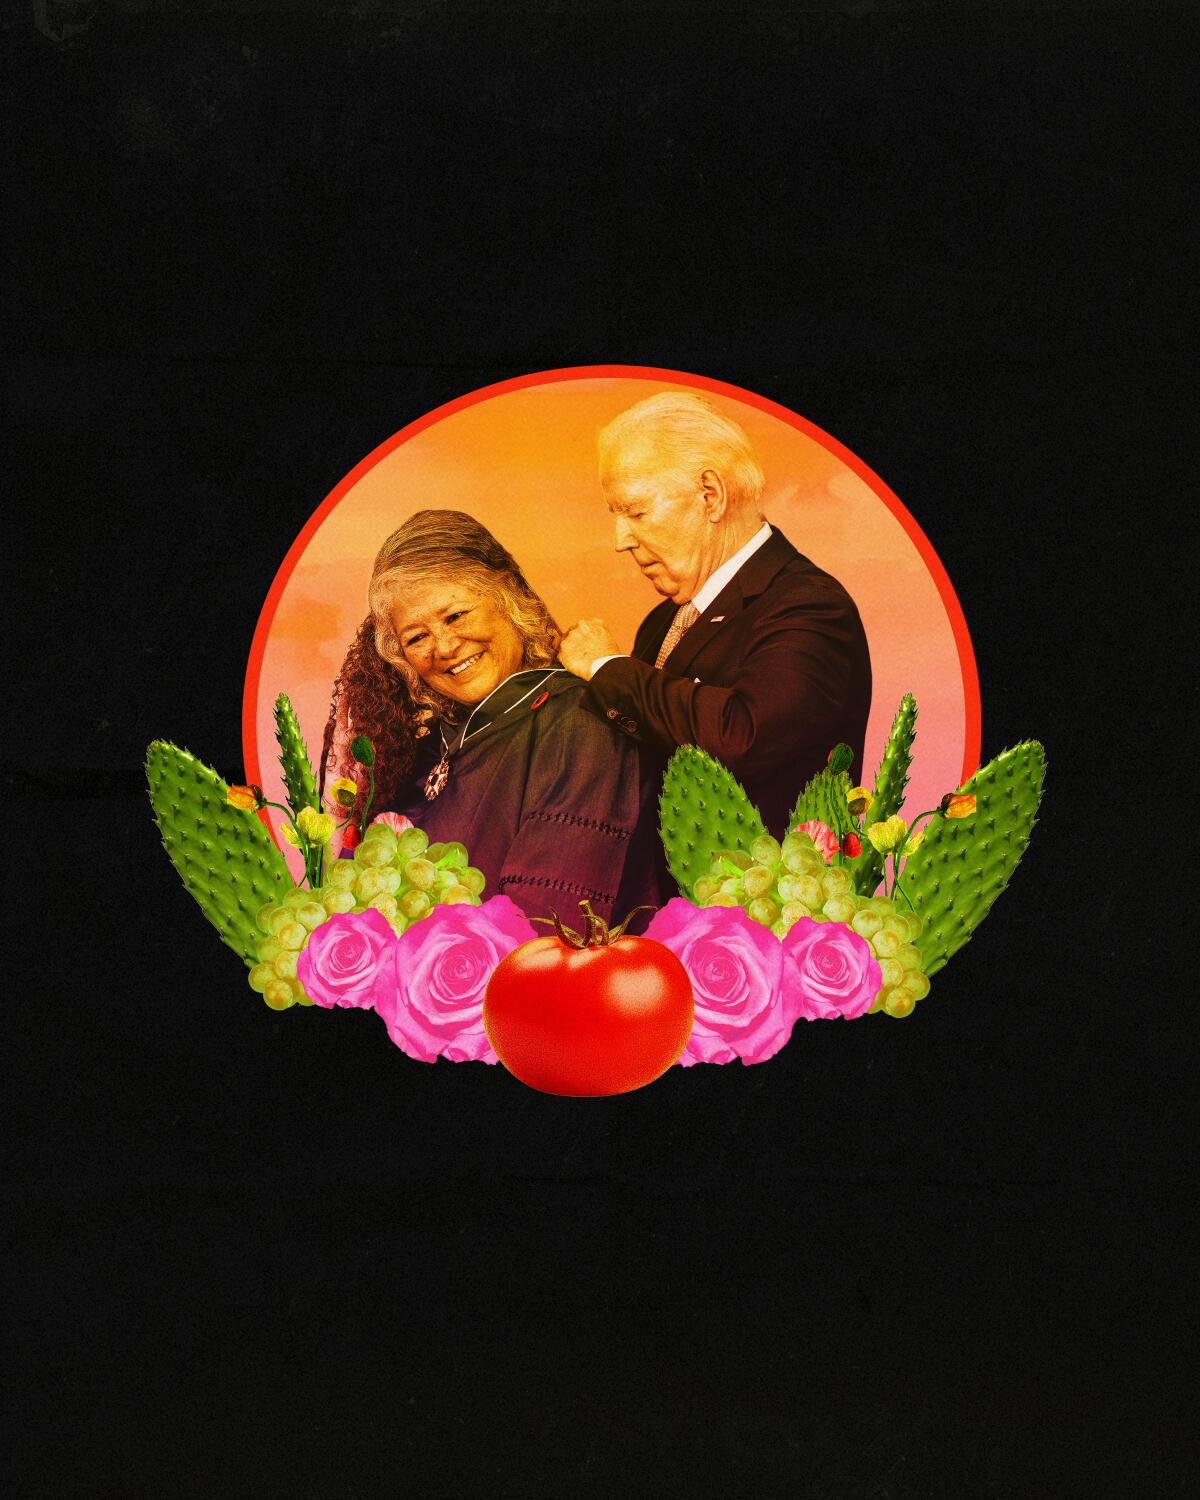 Illustration featuring a photo of President Biden placing a medal on a smiling Teresa Romero, president of UFW